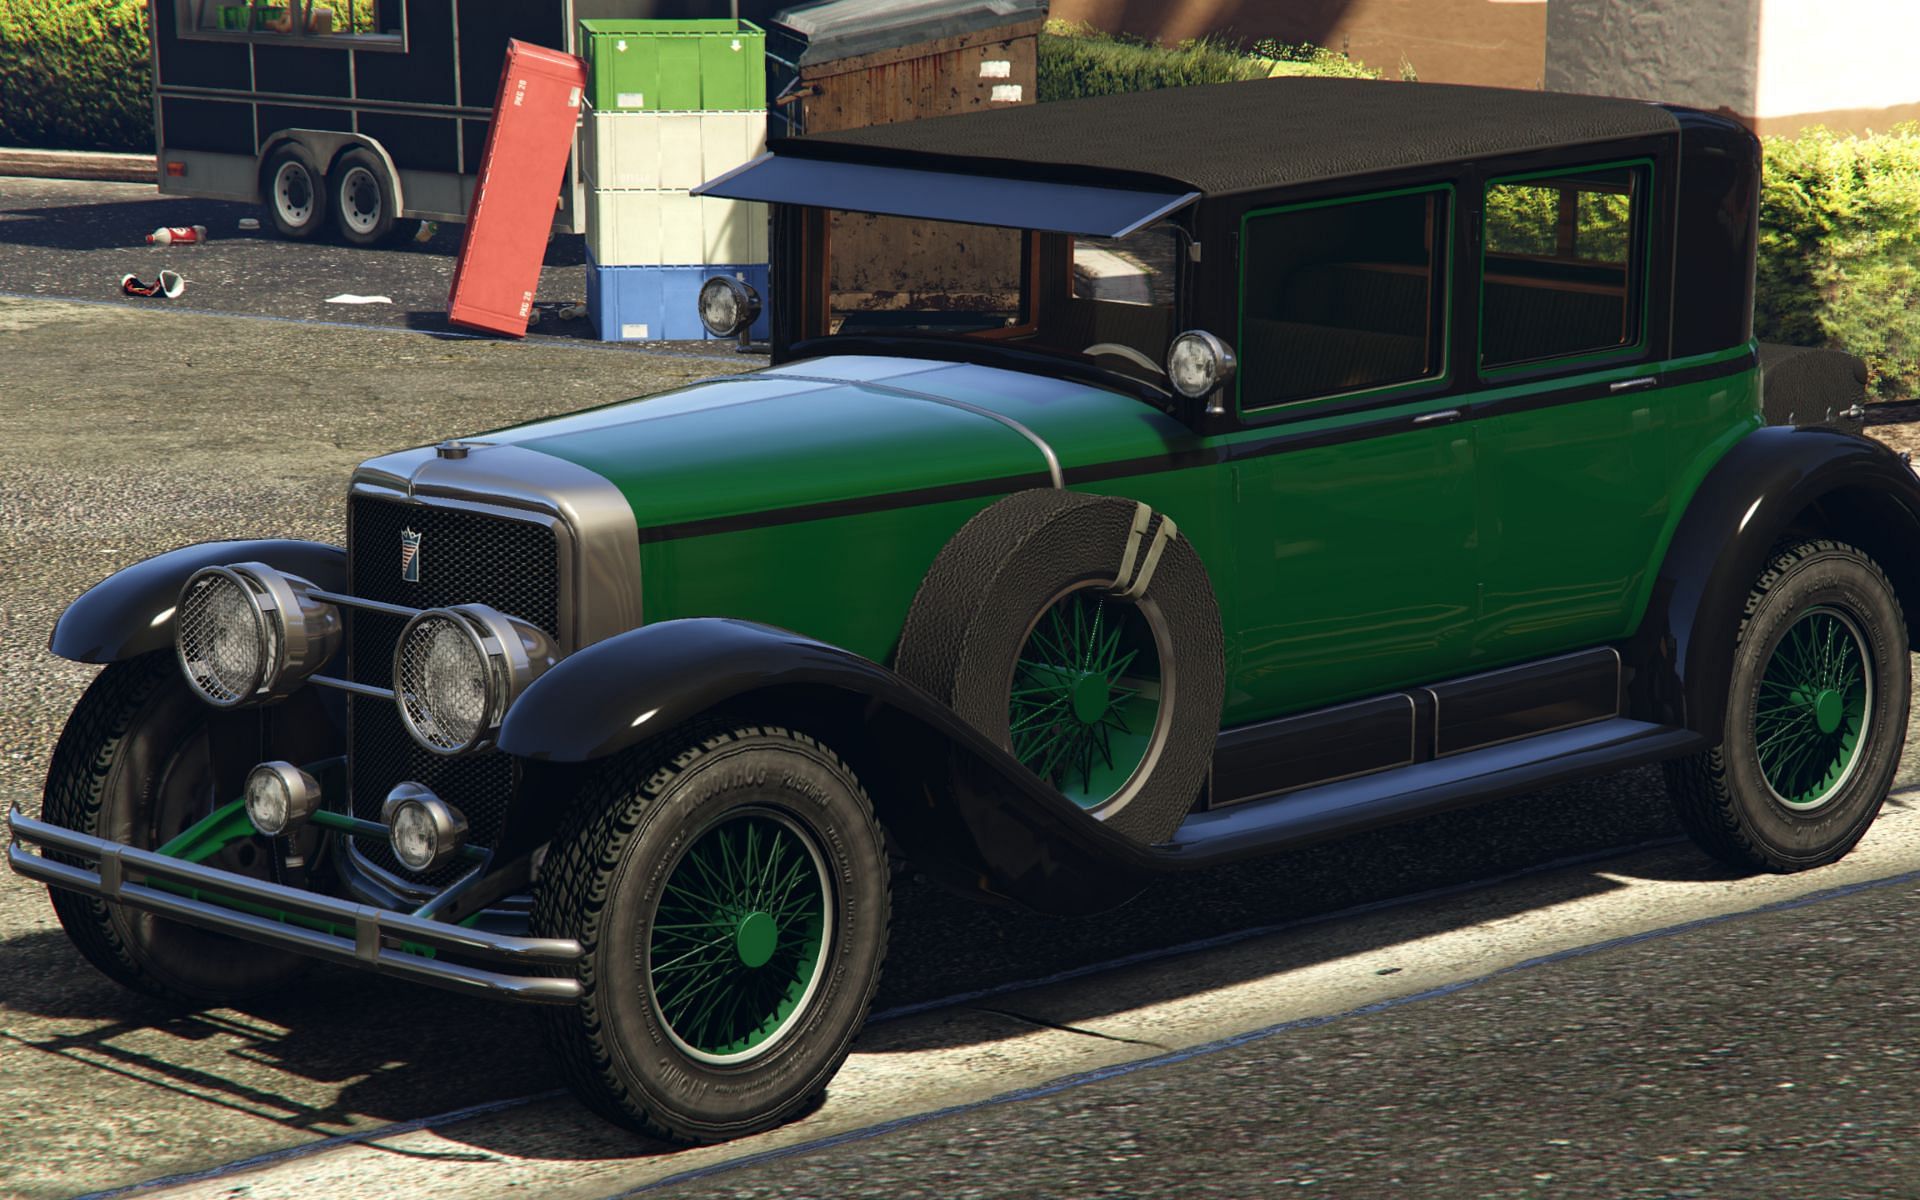 The Albany Roosevelt has been added to the list of Prize Rides (Image via Rockstar Games)